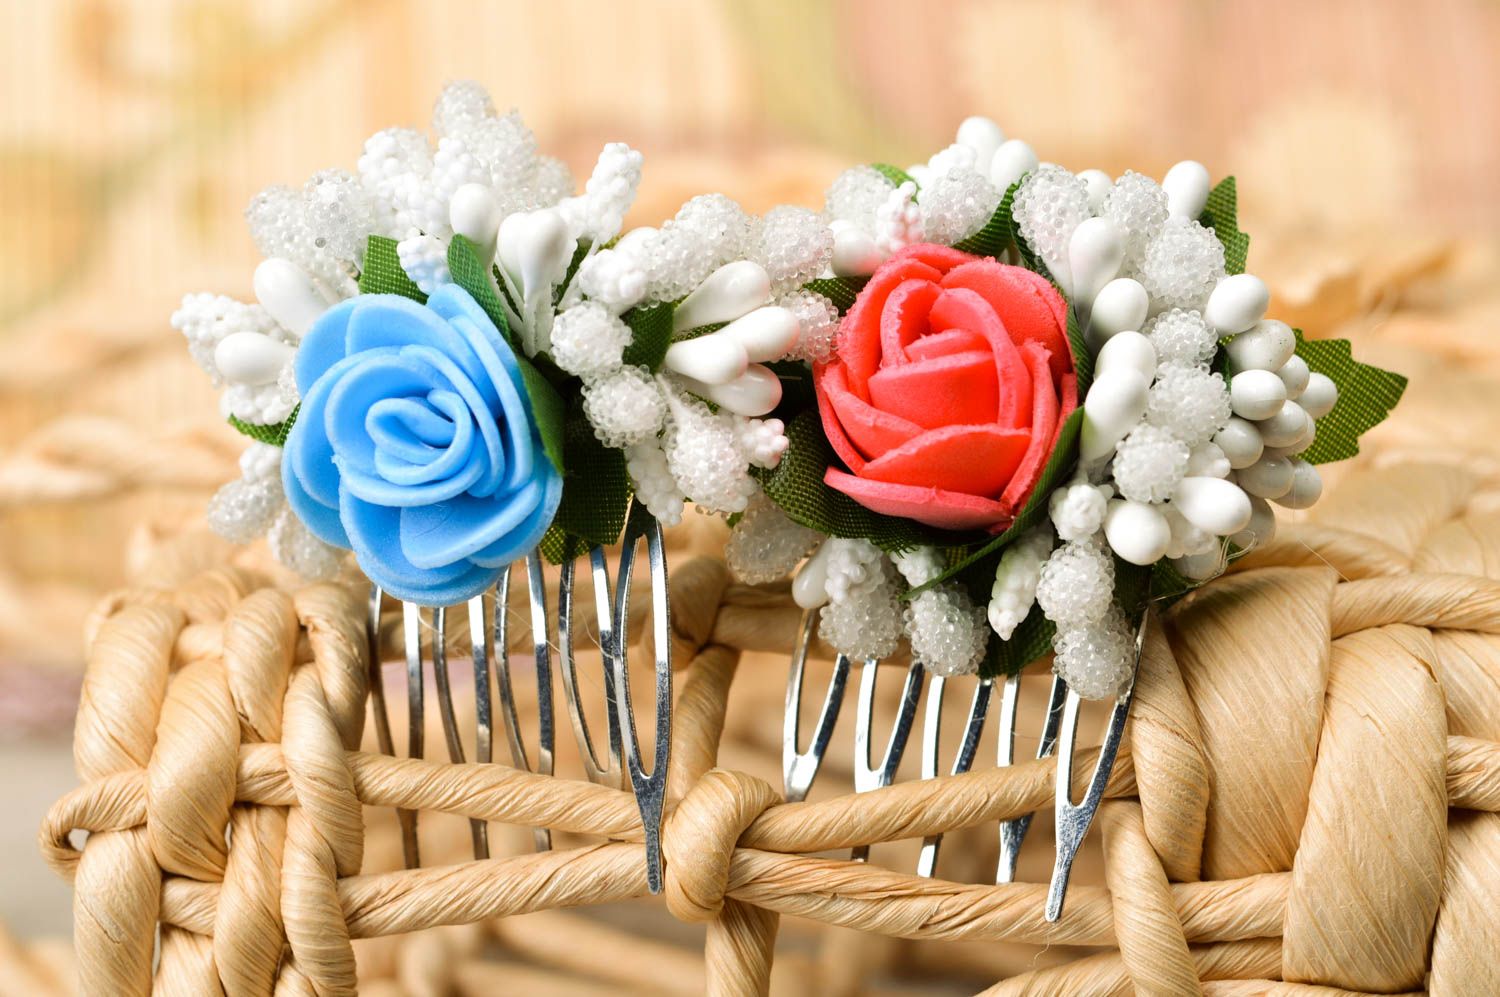 Handmade hair accessories 2 floral hair combs floral hair clips gifts for girls photo 1